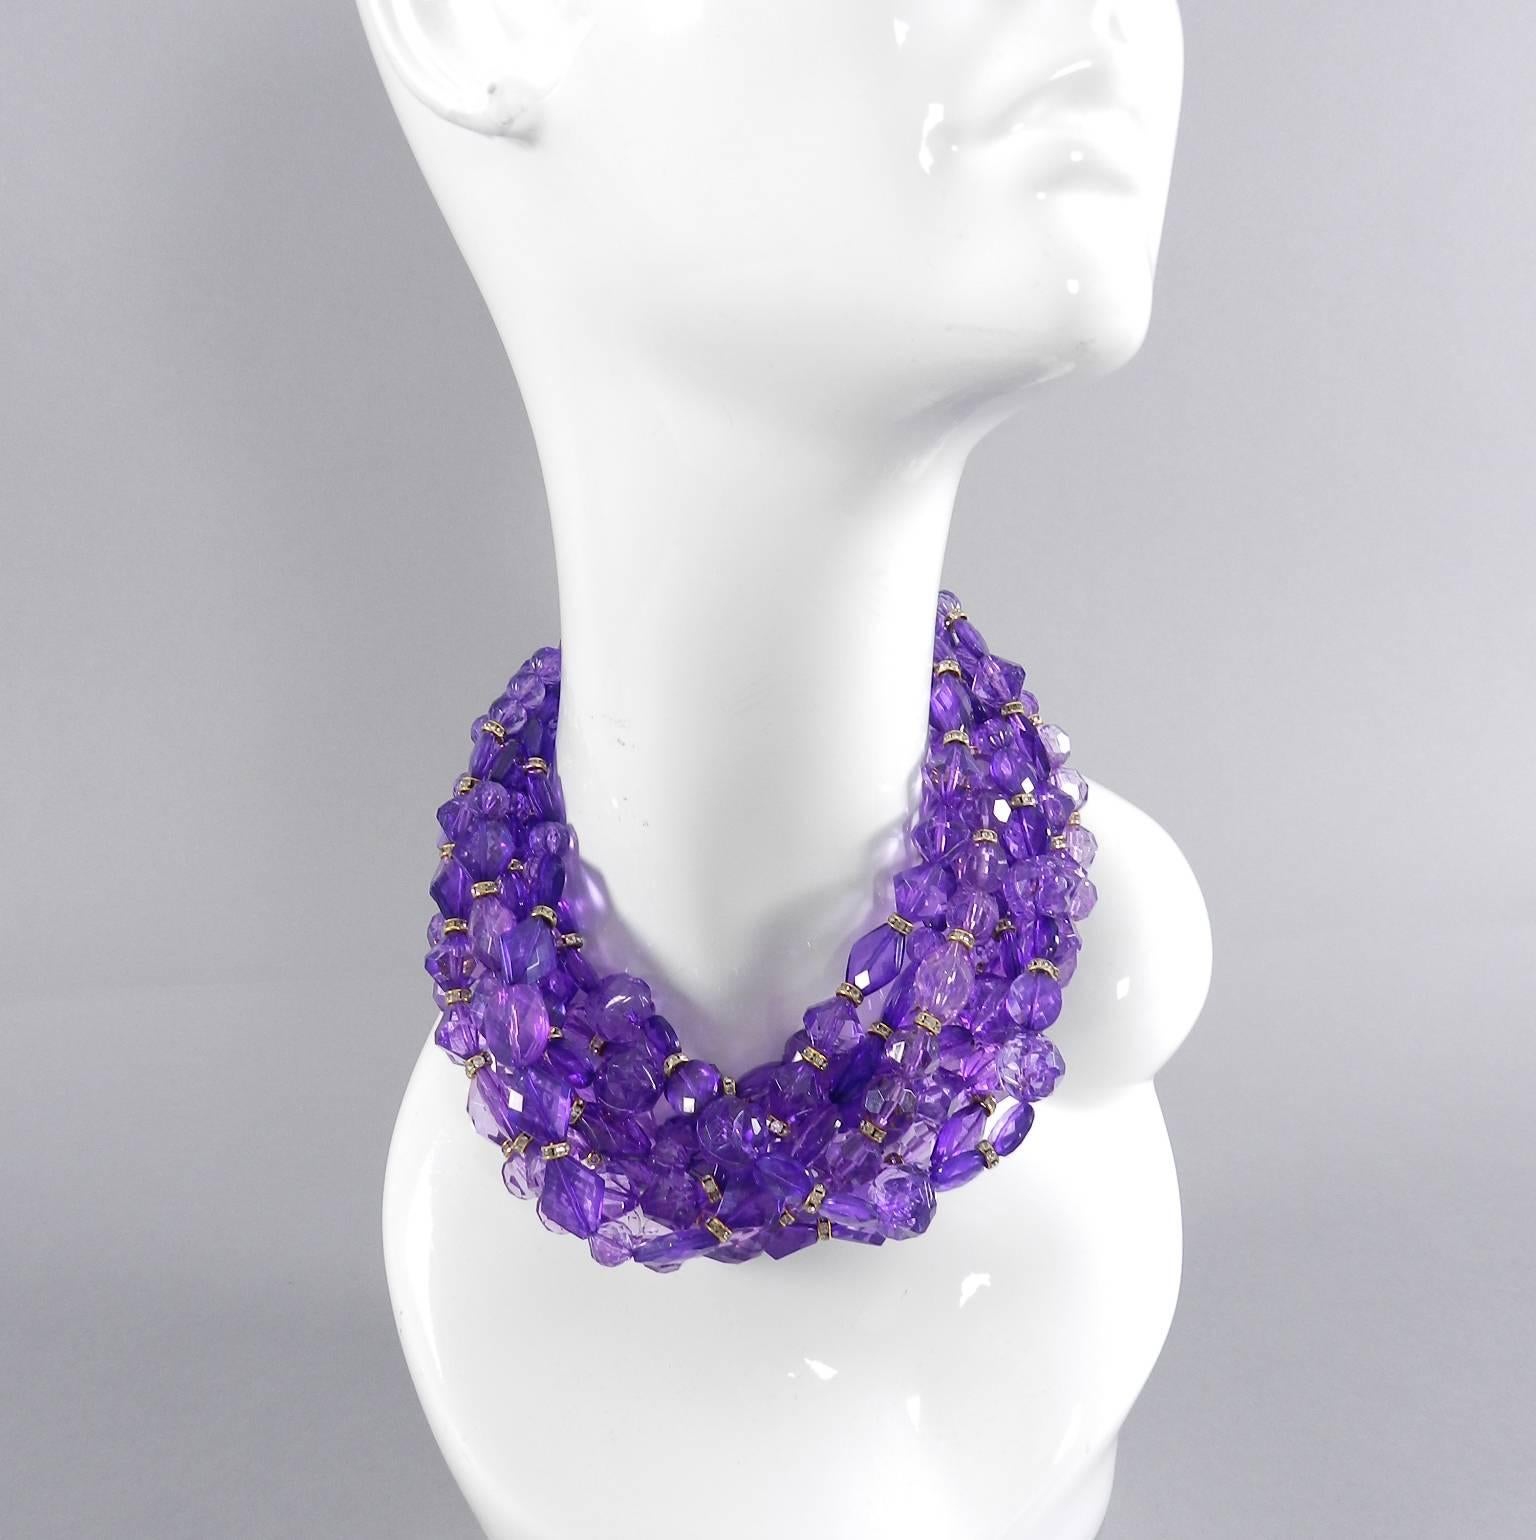 Christian Dior purple 10-strand choker necklace. Purple plastic faceted beads with rhinestone spacers. Metal toggle clasp closure.  Signed Christian Dior Boutique on hang tag. Excellent vintage condition. Measures 15" interior circumference